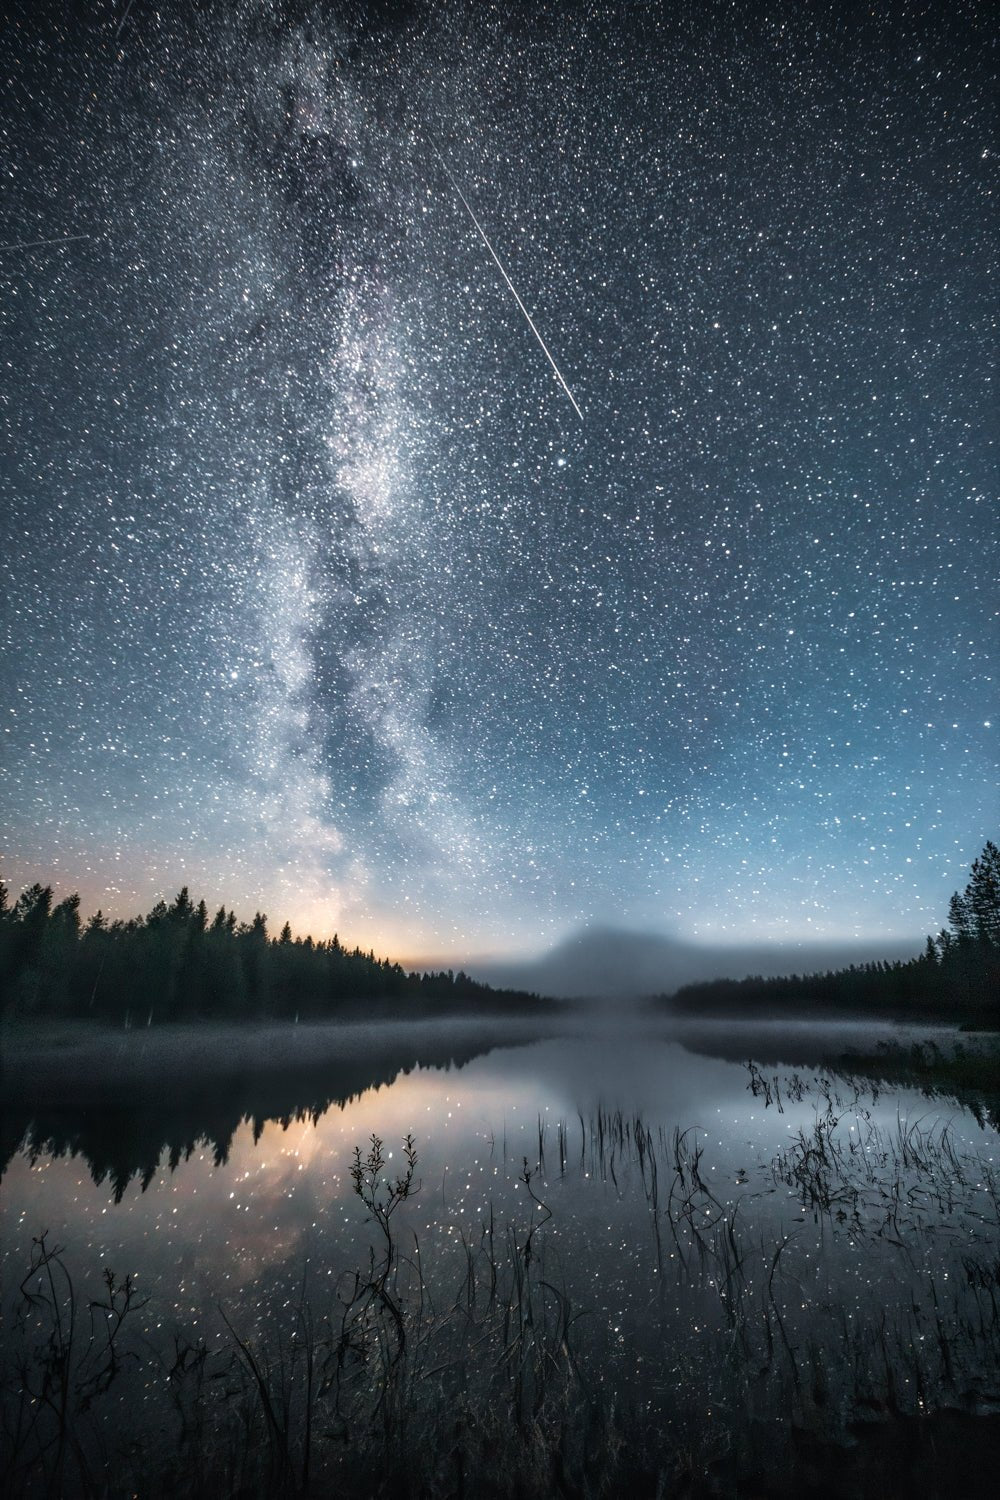 Night sky photo of Milky Way and stars mirrored in lake with shooting star, capturing the feeling of a northern autumn night.